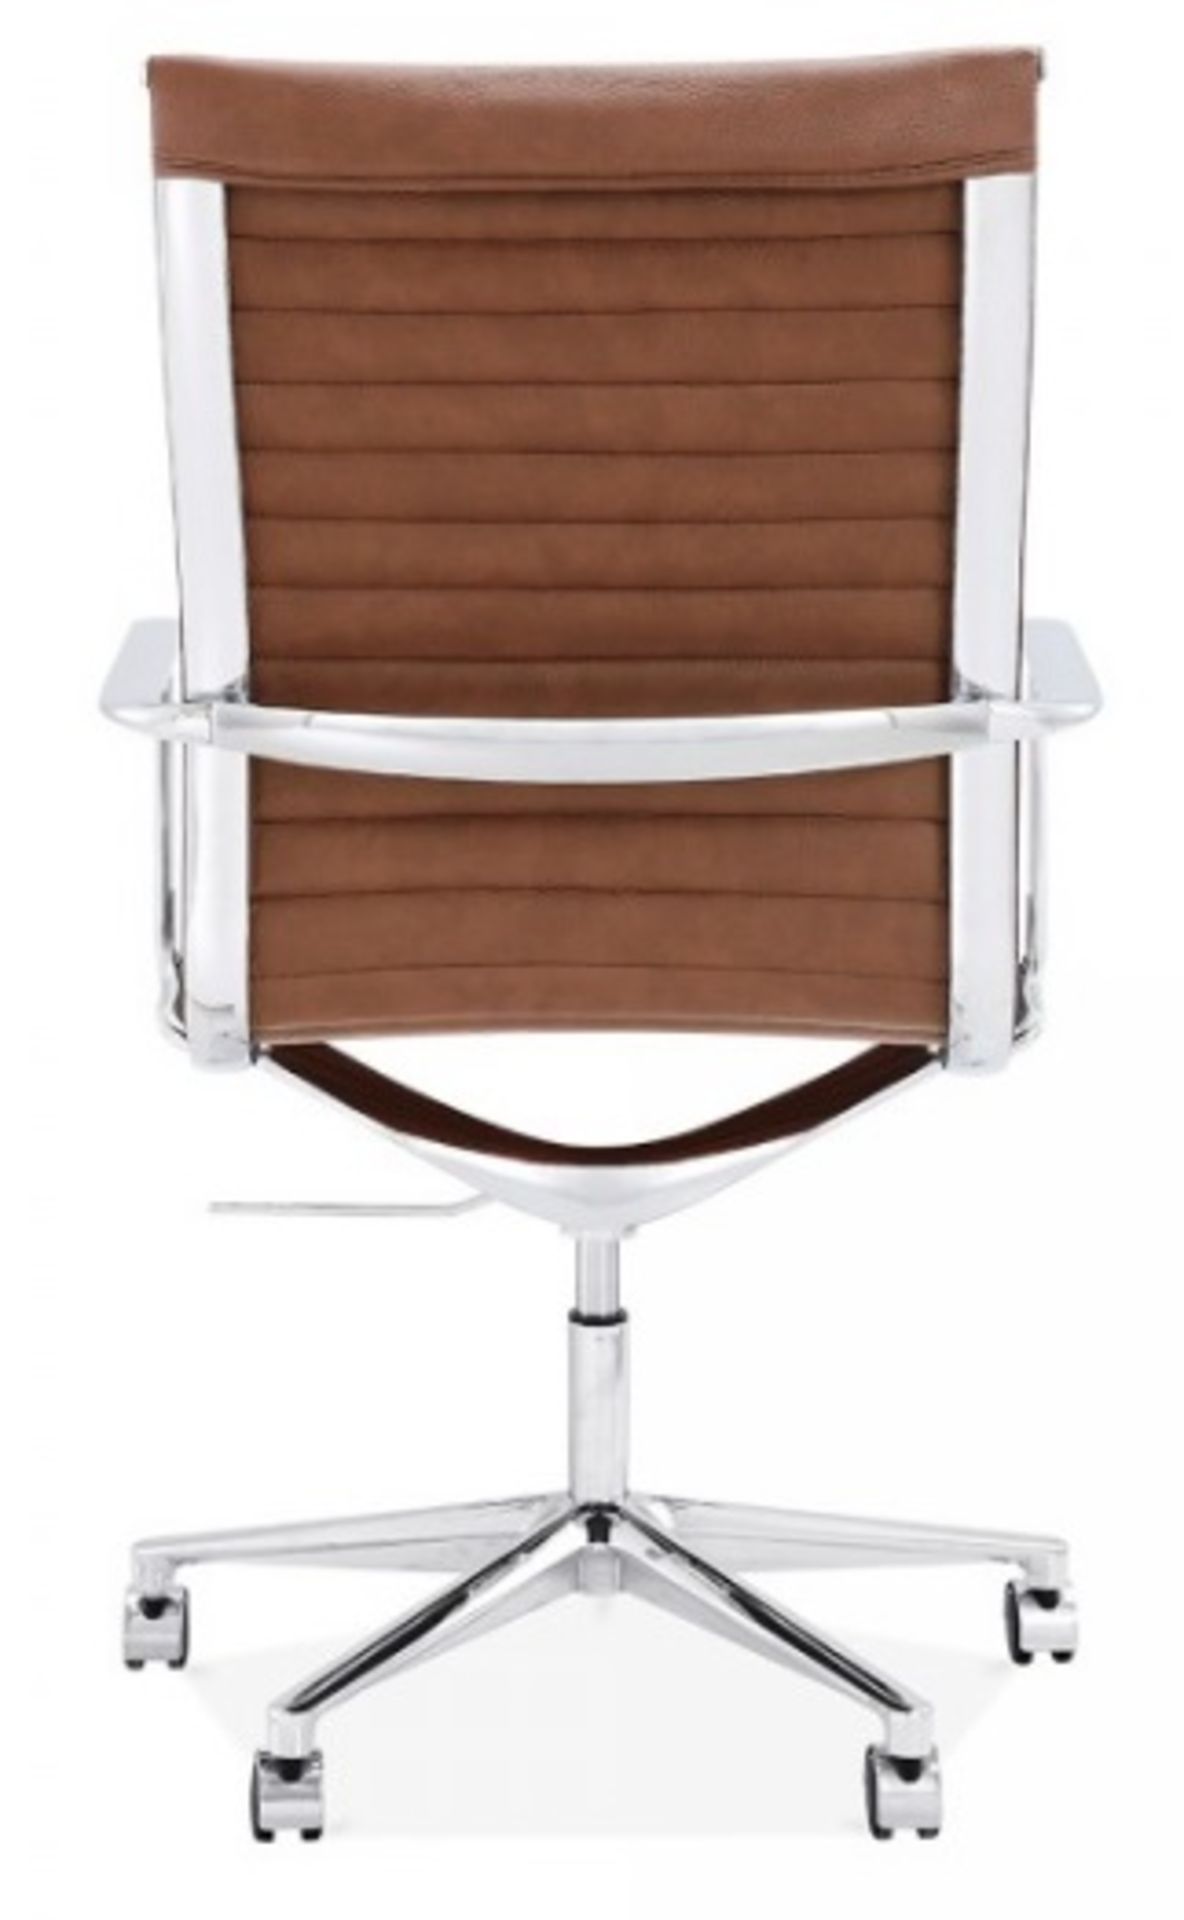 1 x LINEAR Eames-Inspired Ribbed High Back Office Swivel Chair In Brown Leather- New / Unboxed Stock - Image 2 of 5